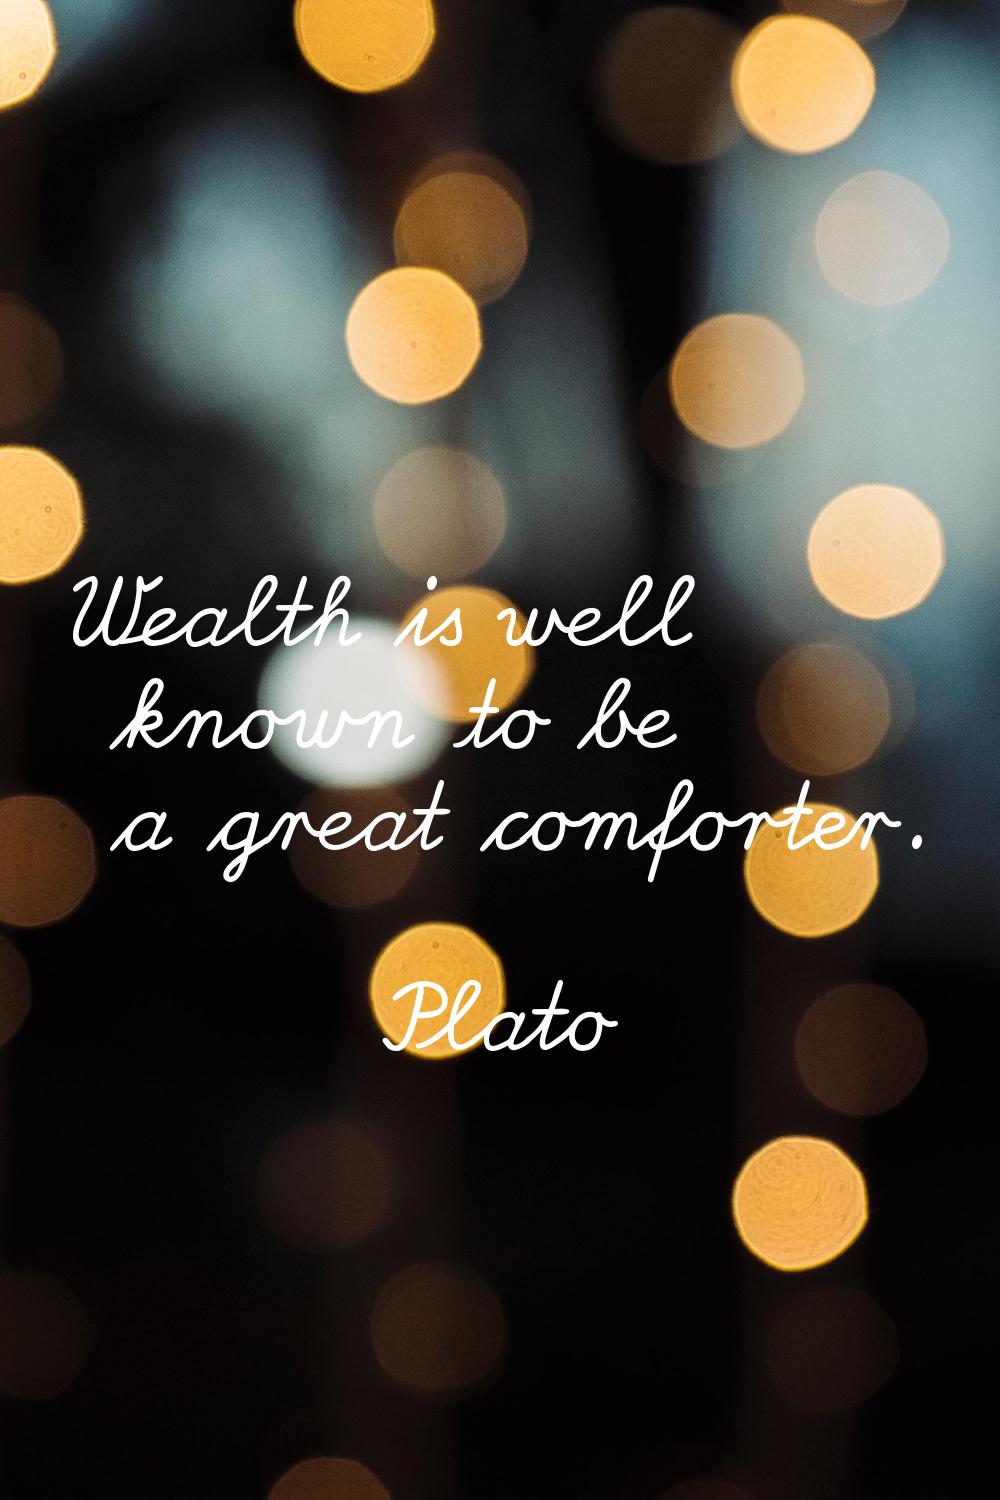 Wealth is well known to be a great comforter.